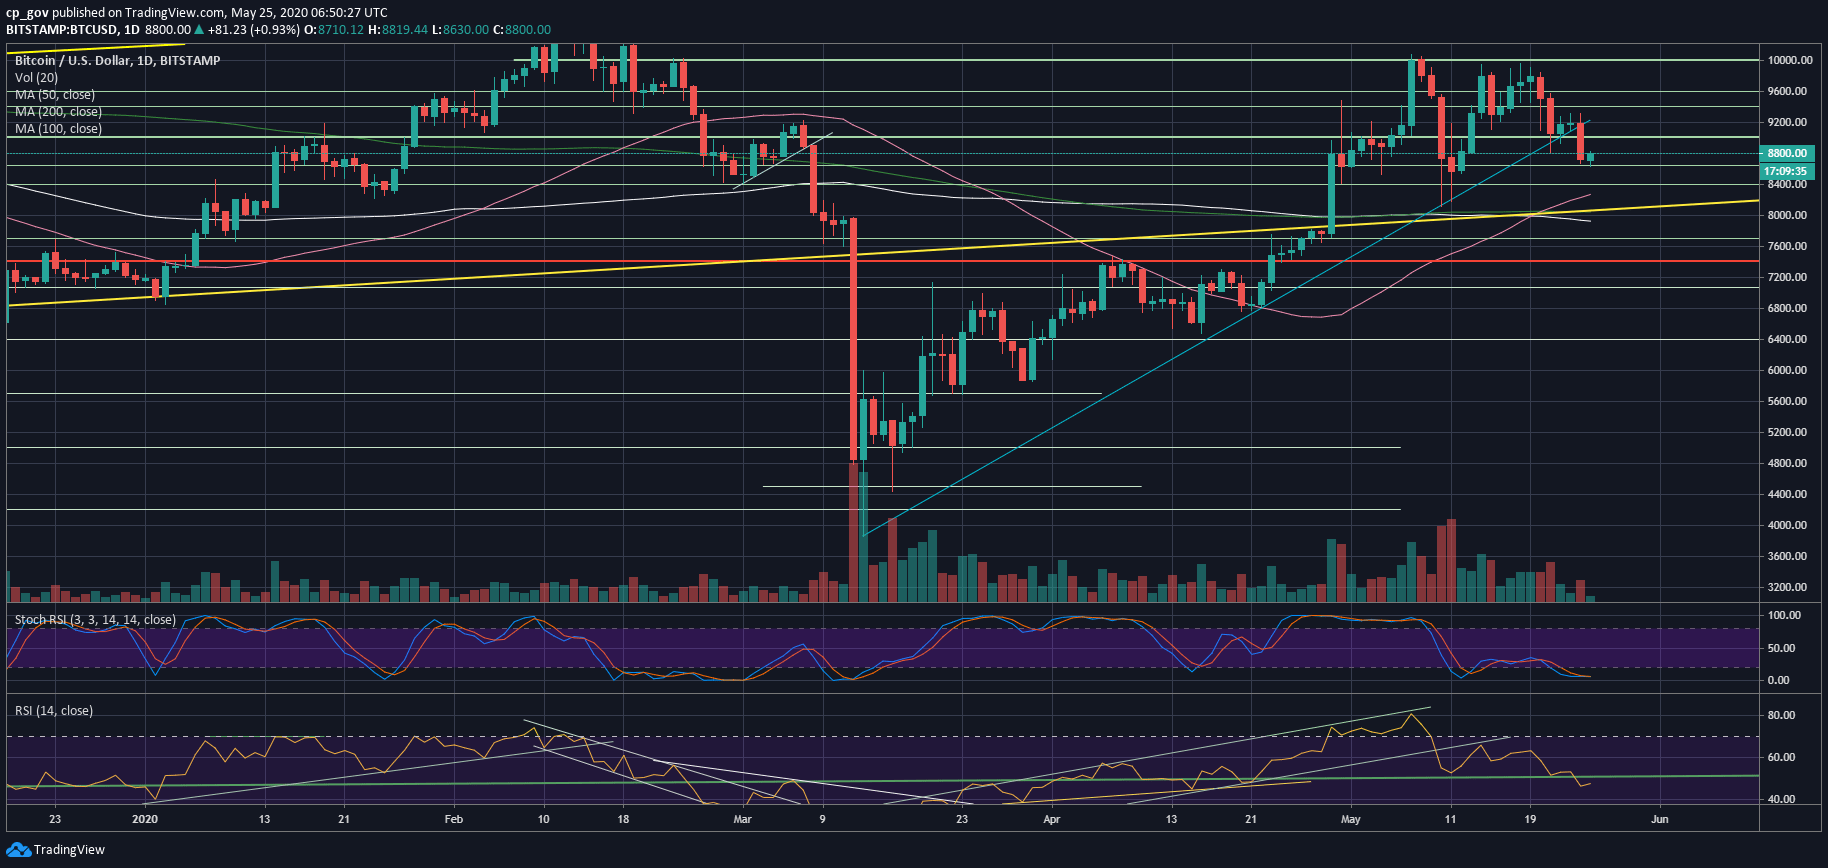 Bitcoin Fails And Breaks Down March-12 Crucial Support. $8200 Incoming? BTC Price Analysis